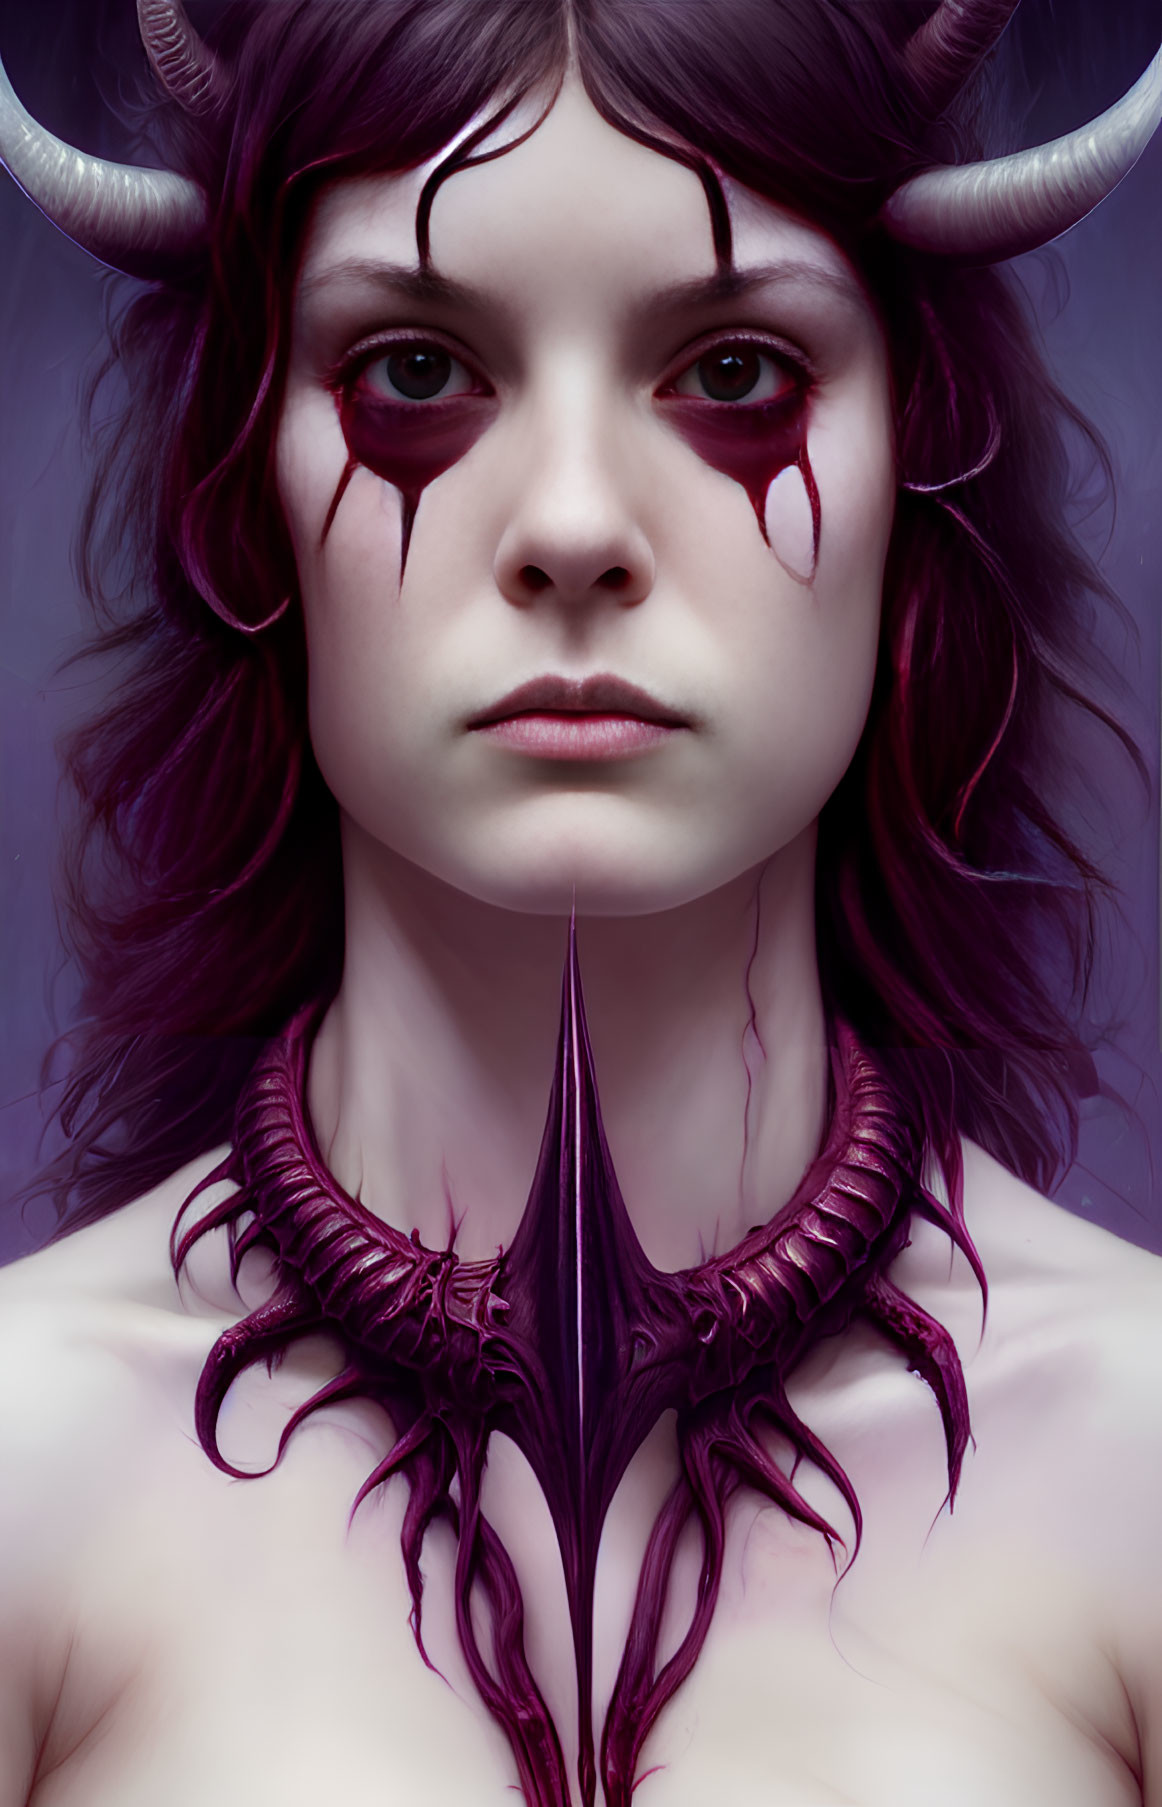 Purple-haired person with horns and choker in somber pose with tear streaks.